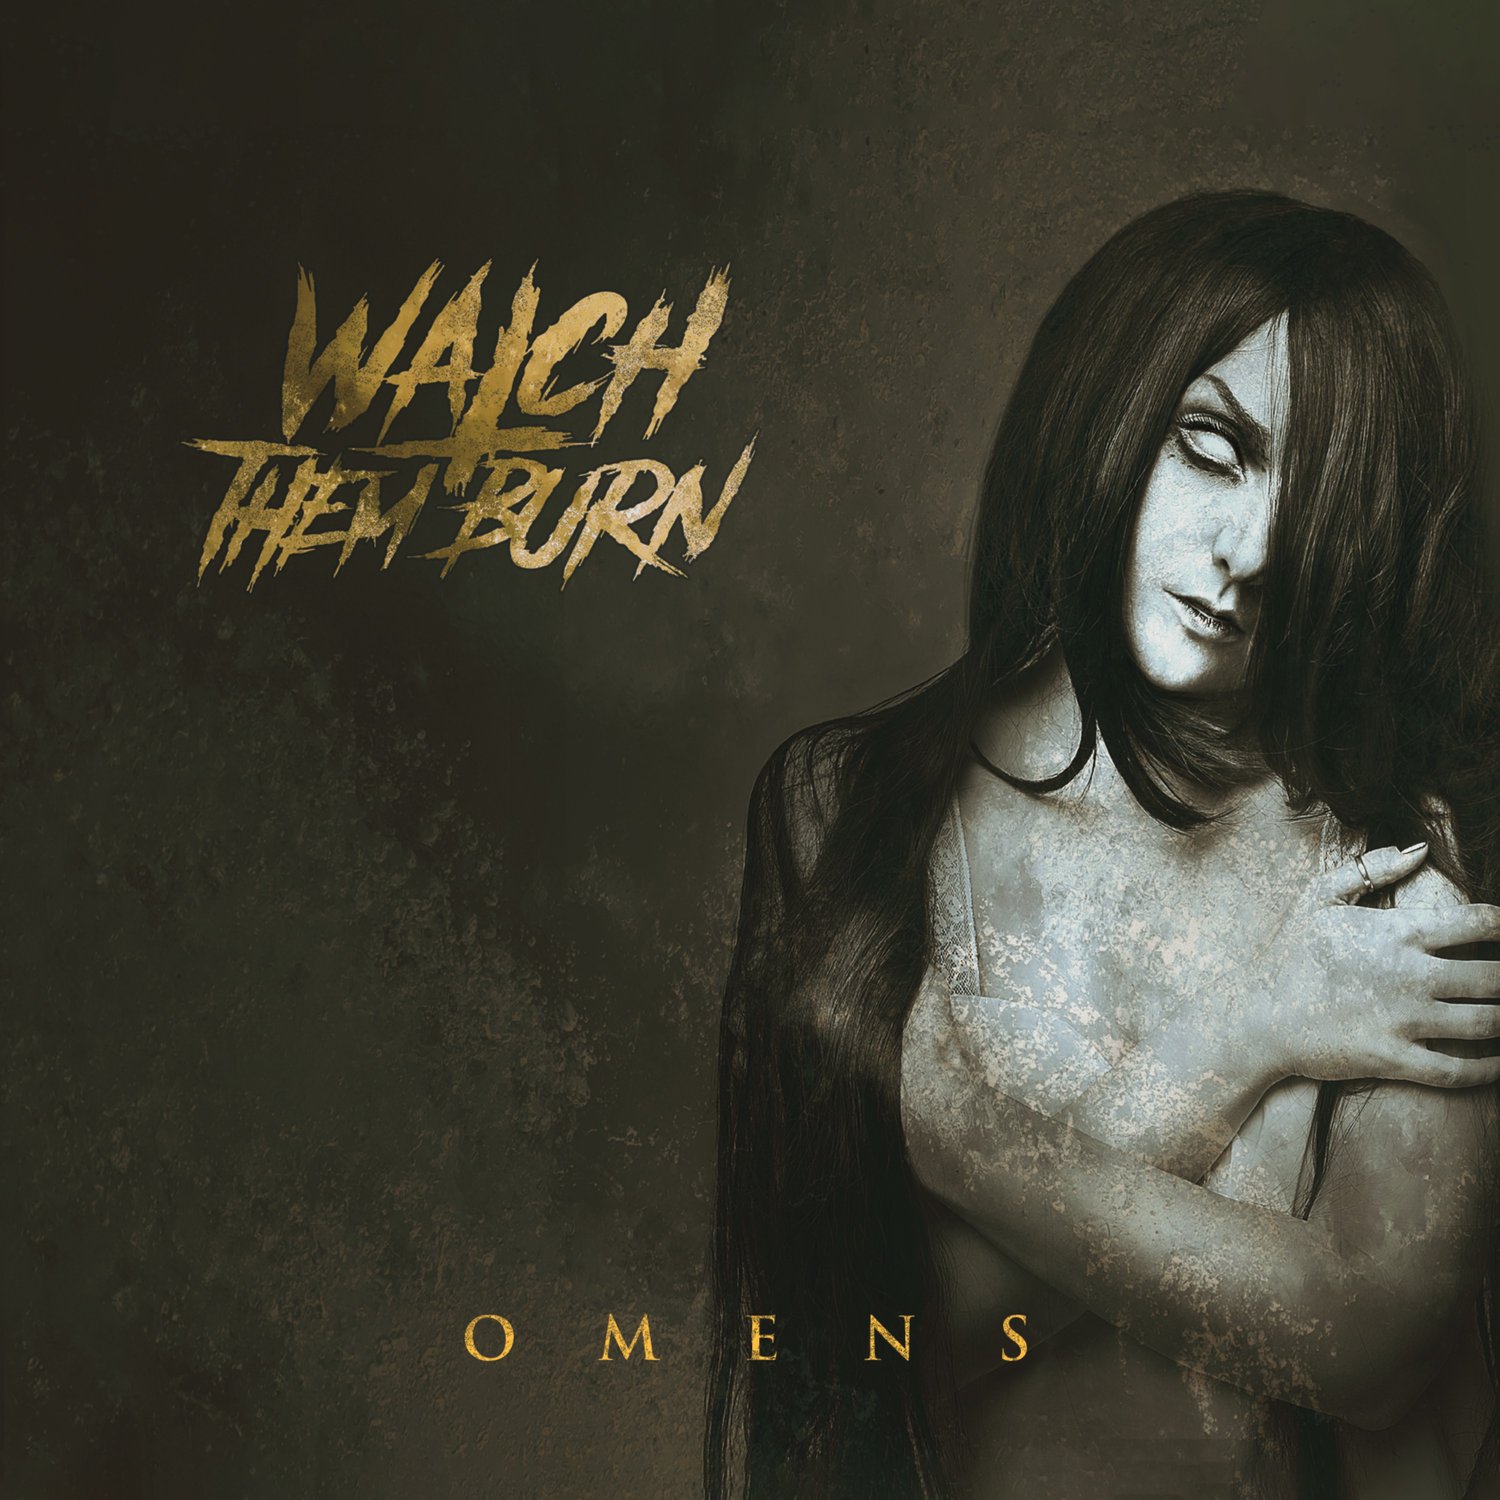 Image of "OMENS" Physical CD